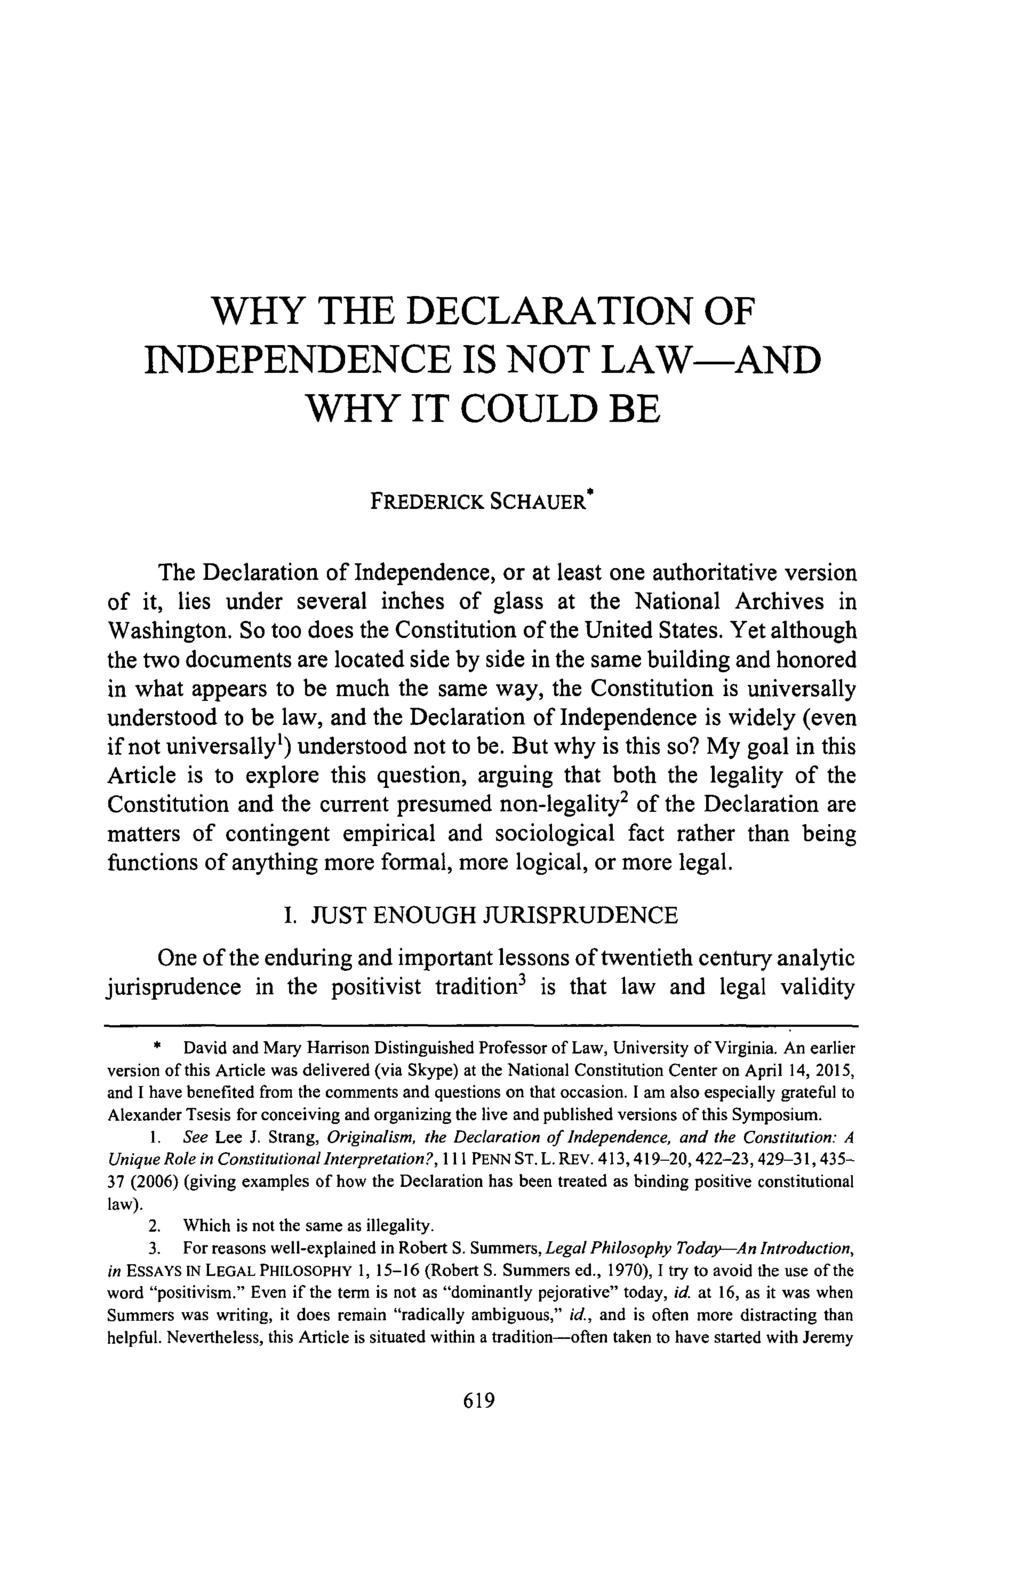 WHY THE DECLARATION OF INDEPENDENCE IS NOT LAW-AND WHY IT COULD BE FREDERICK SCHAUER* The Declaration of Independence, or at least one authoritative version of it, lies under several inches of glass